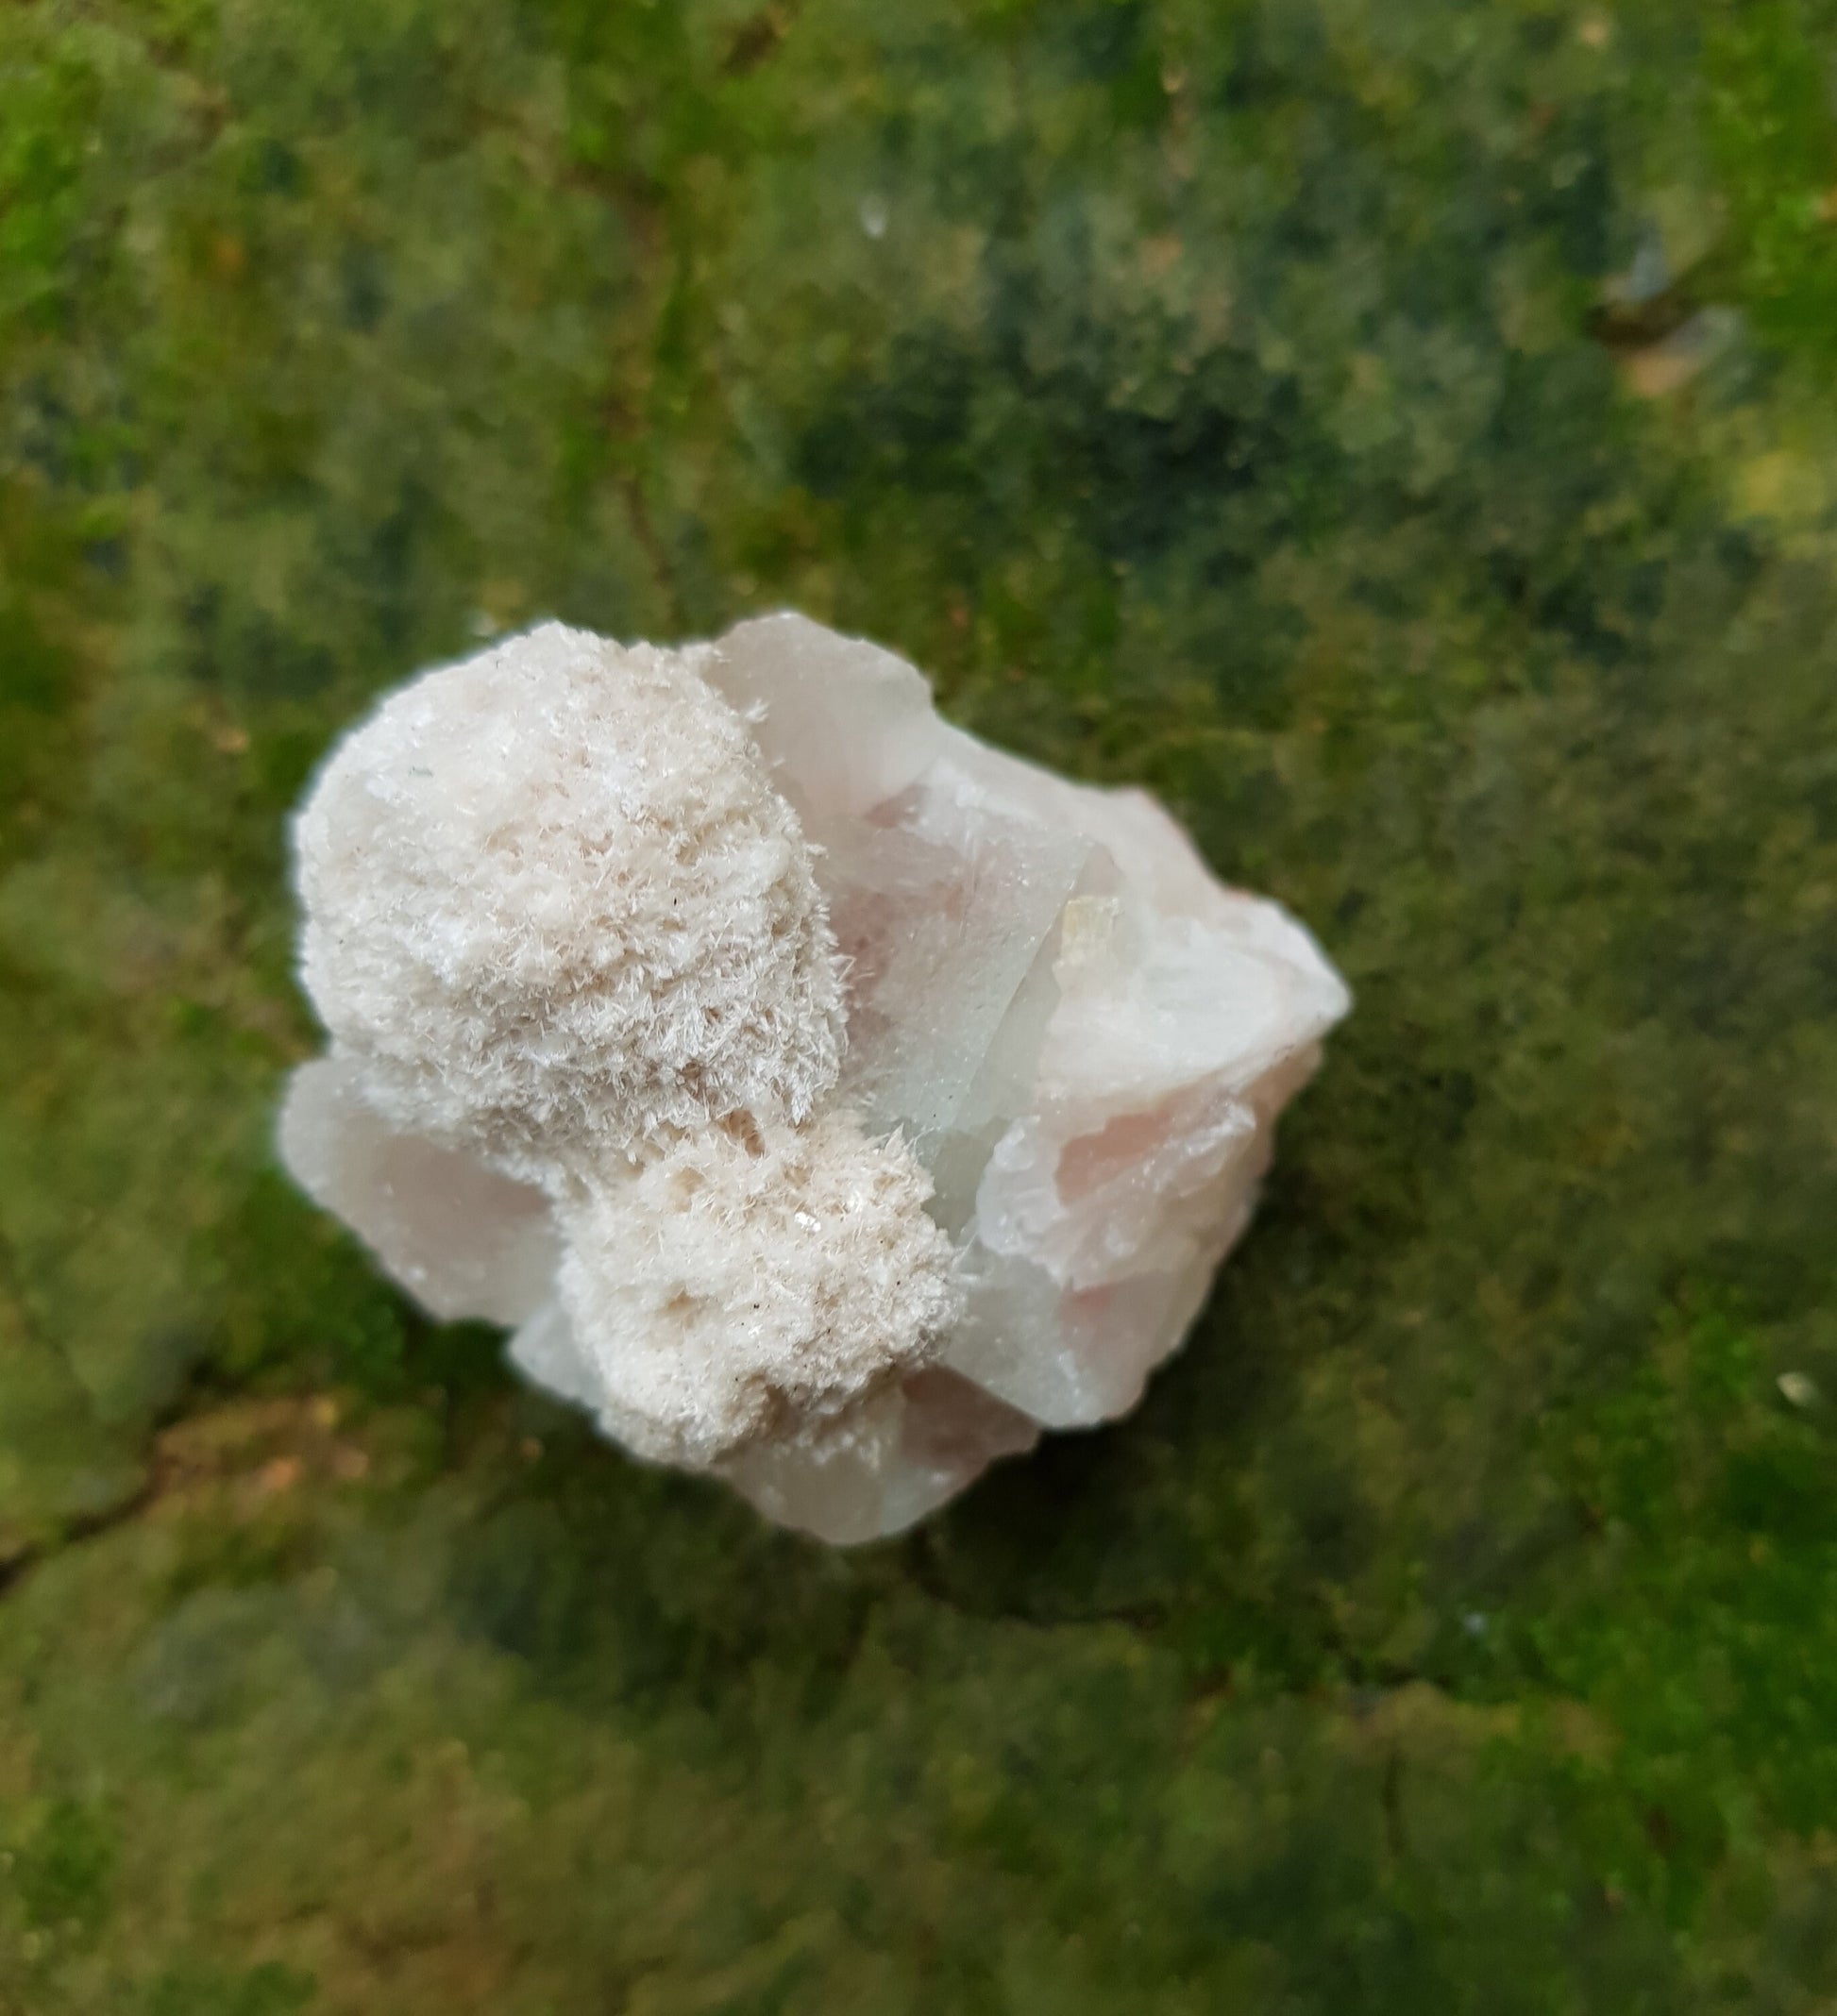 Small Natural Crystal Cluster, Apophyllite on Stilbite And Mordenite, Healing Crystal, Mineral Specimen, Mineral Collection